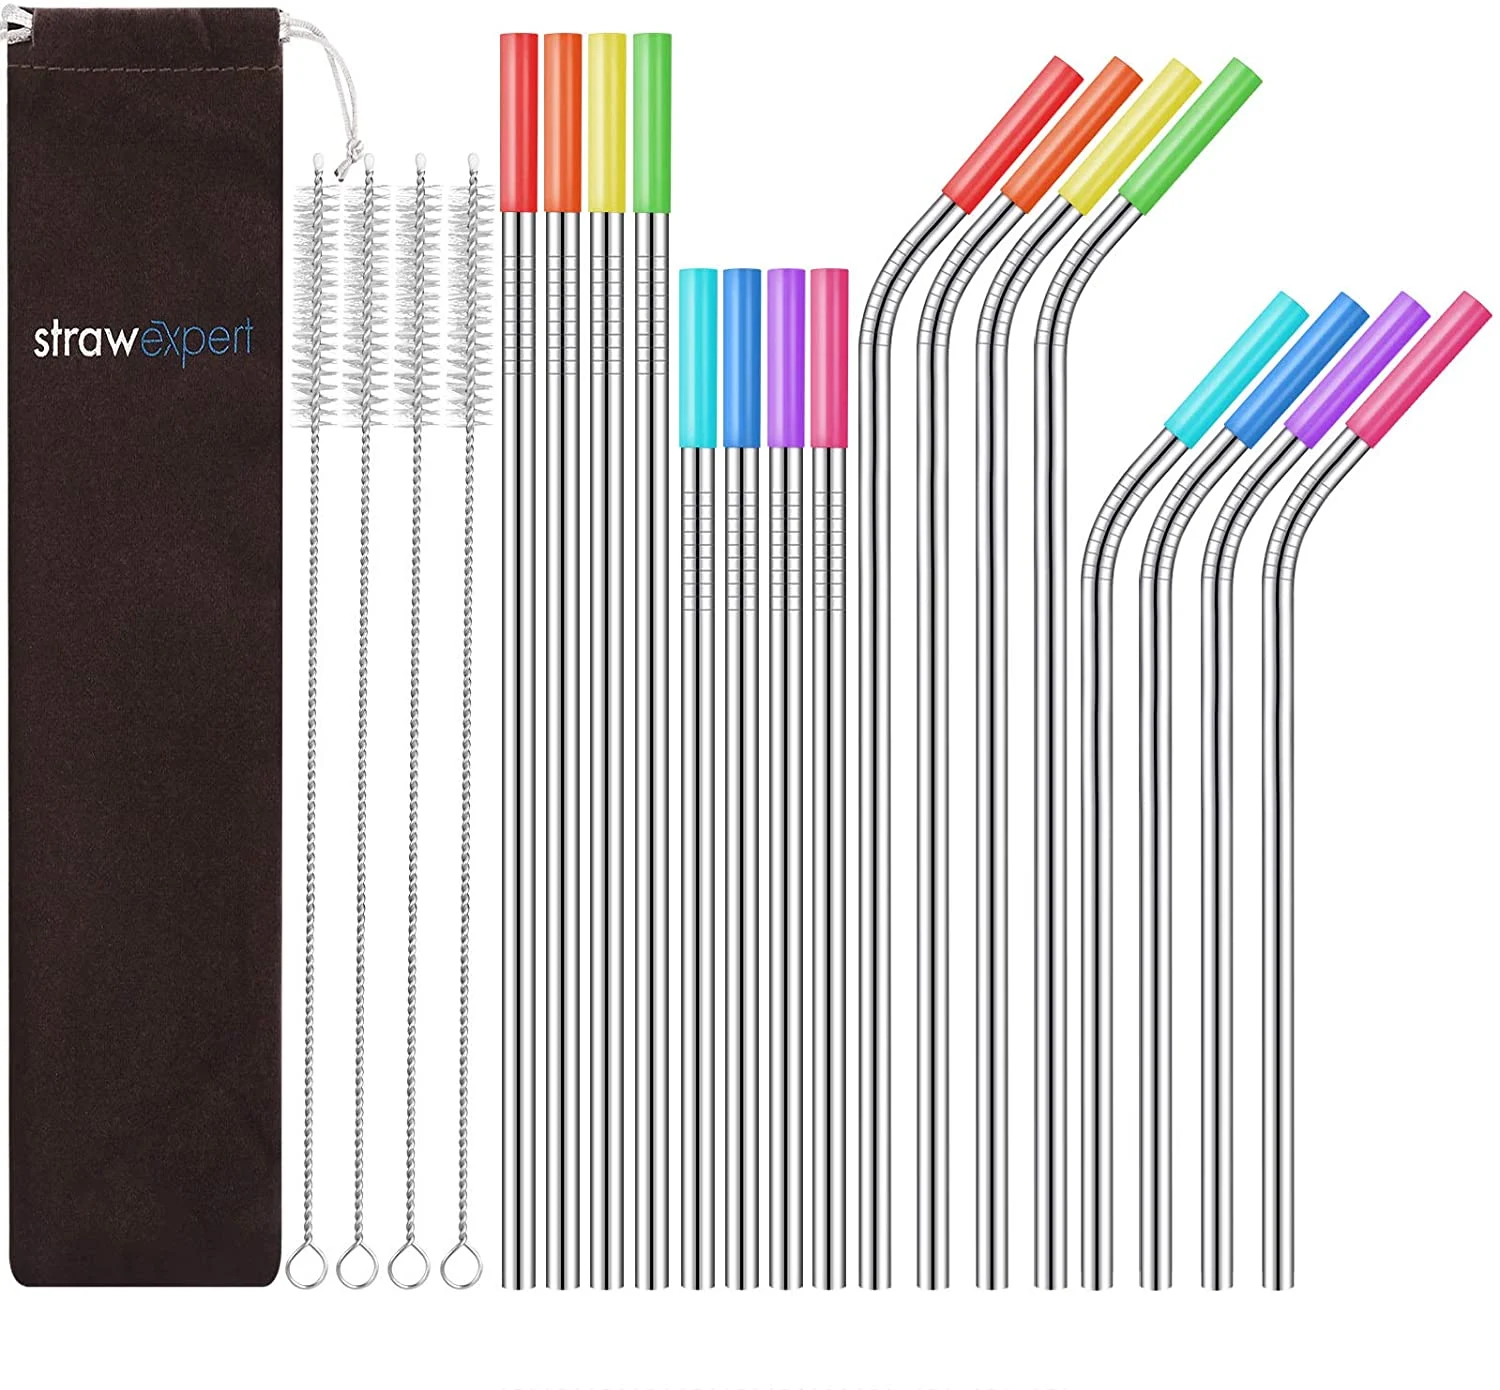 16 Reusable Stainless Steel Straws with Travel Case